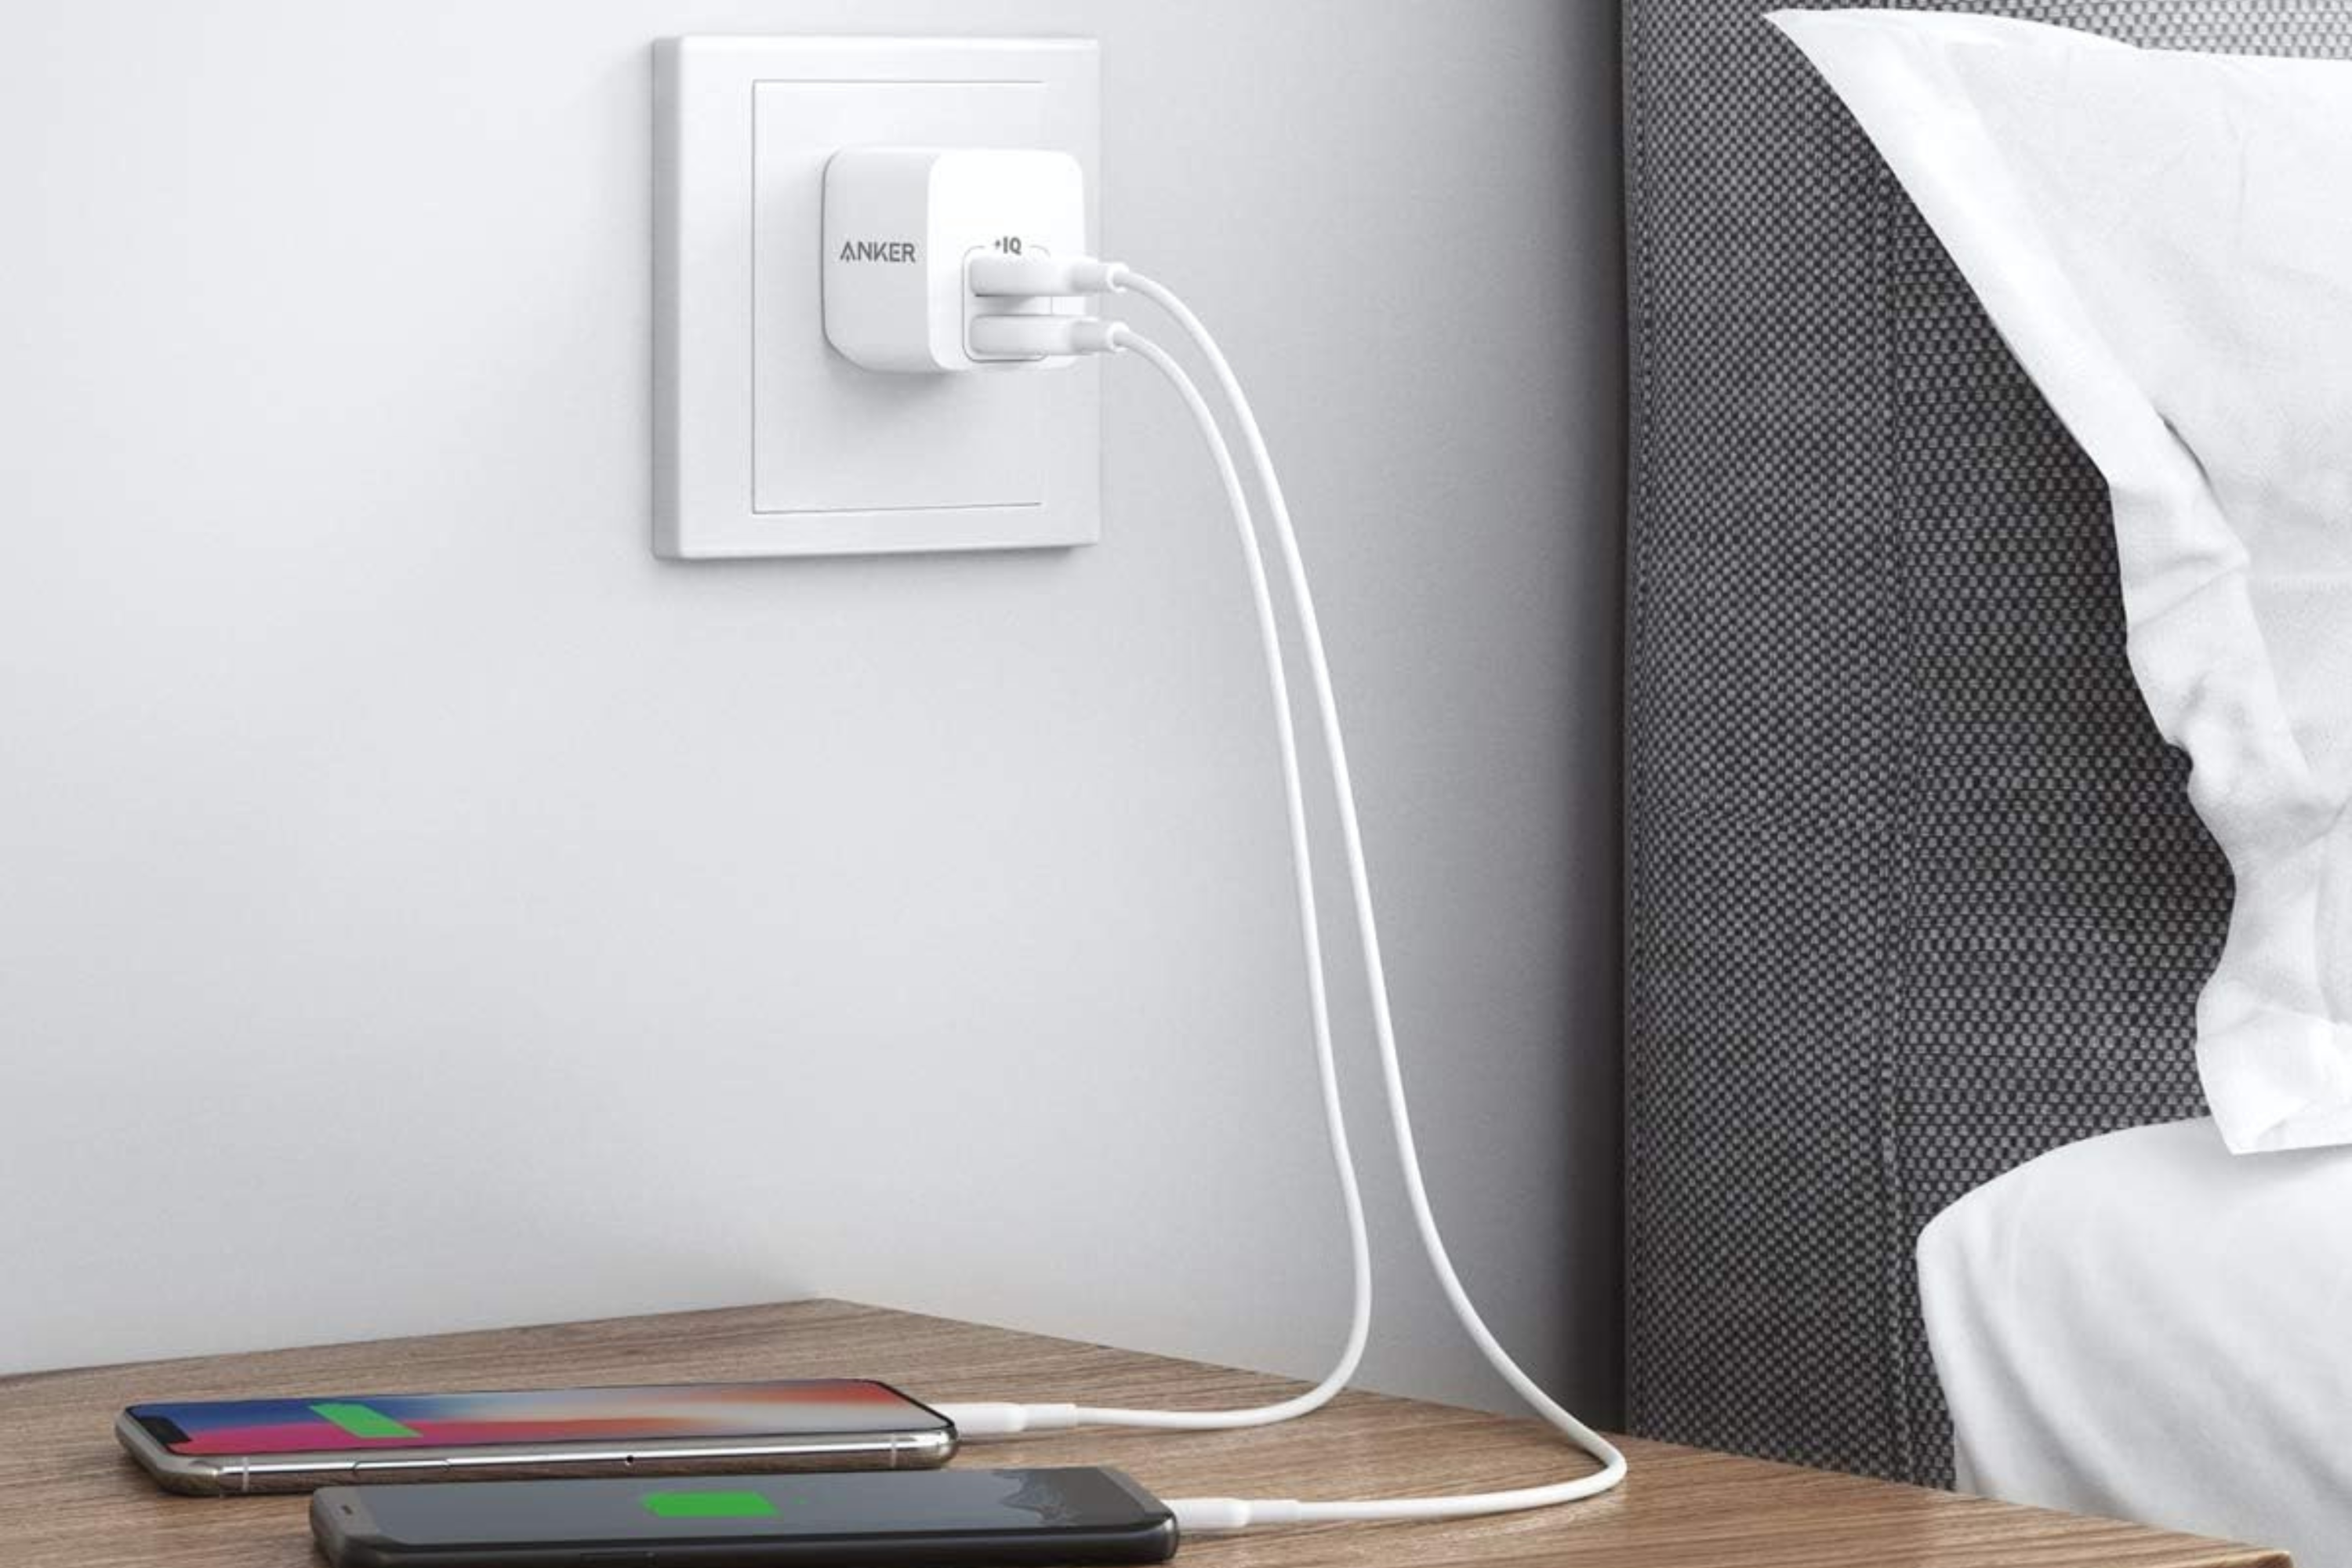 Anker charger plugged into wall charging two phones